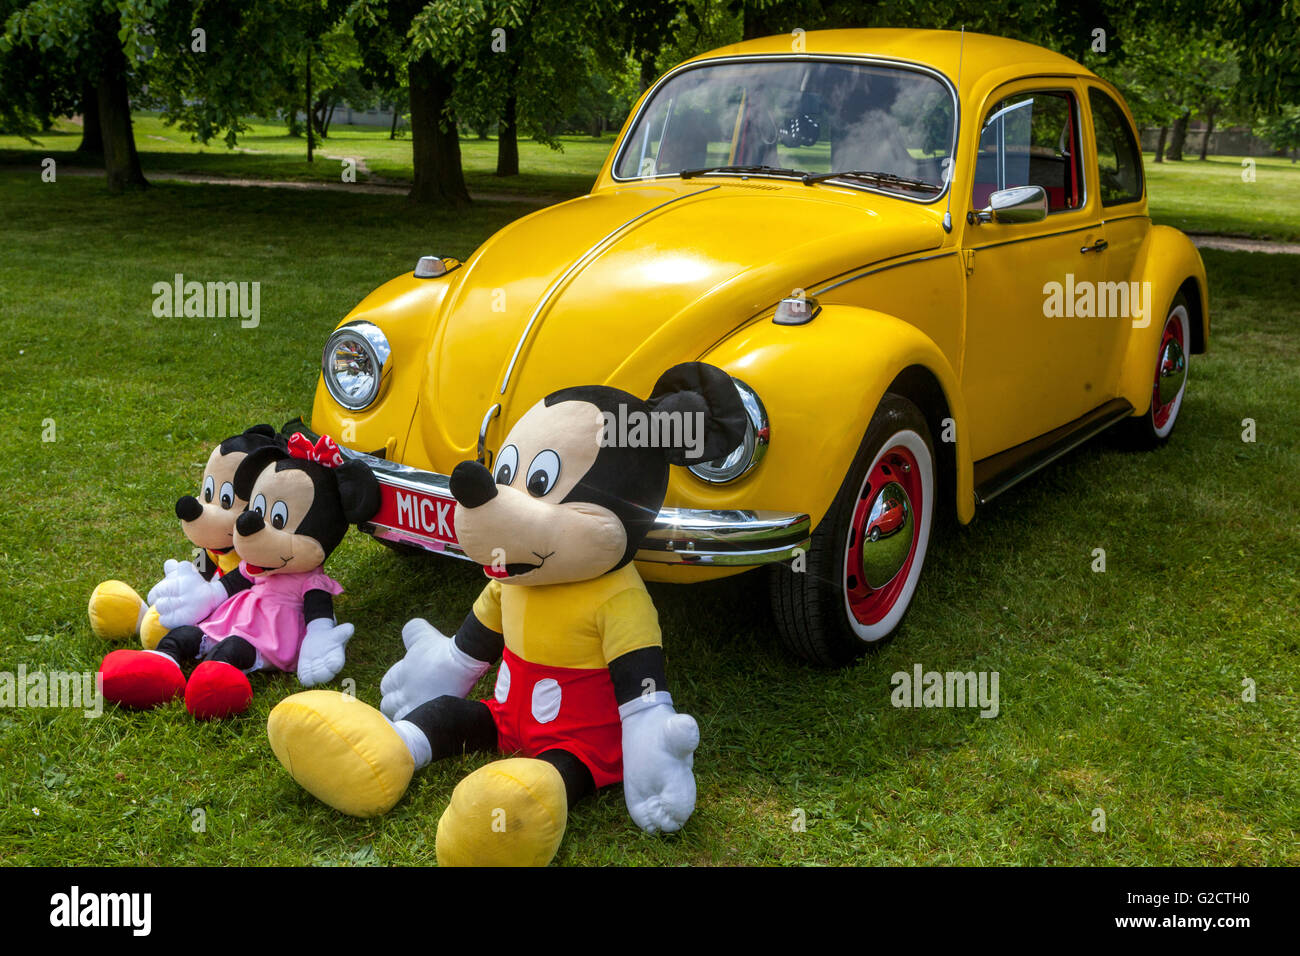 Yellow VW car beetle and Mickey mouse toys family, Car toys Stock Photo